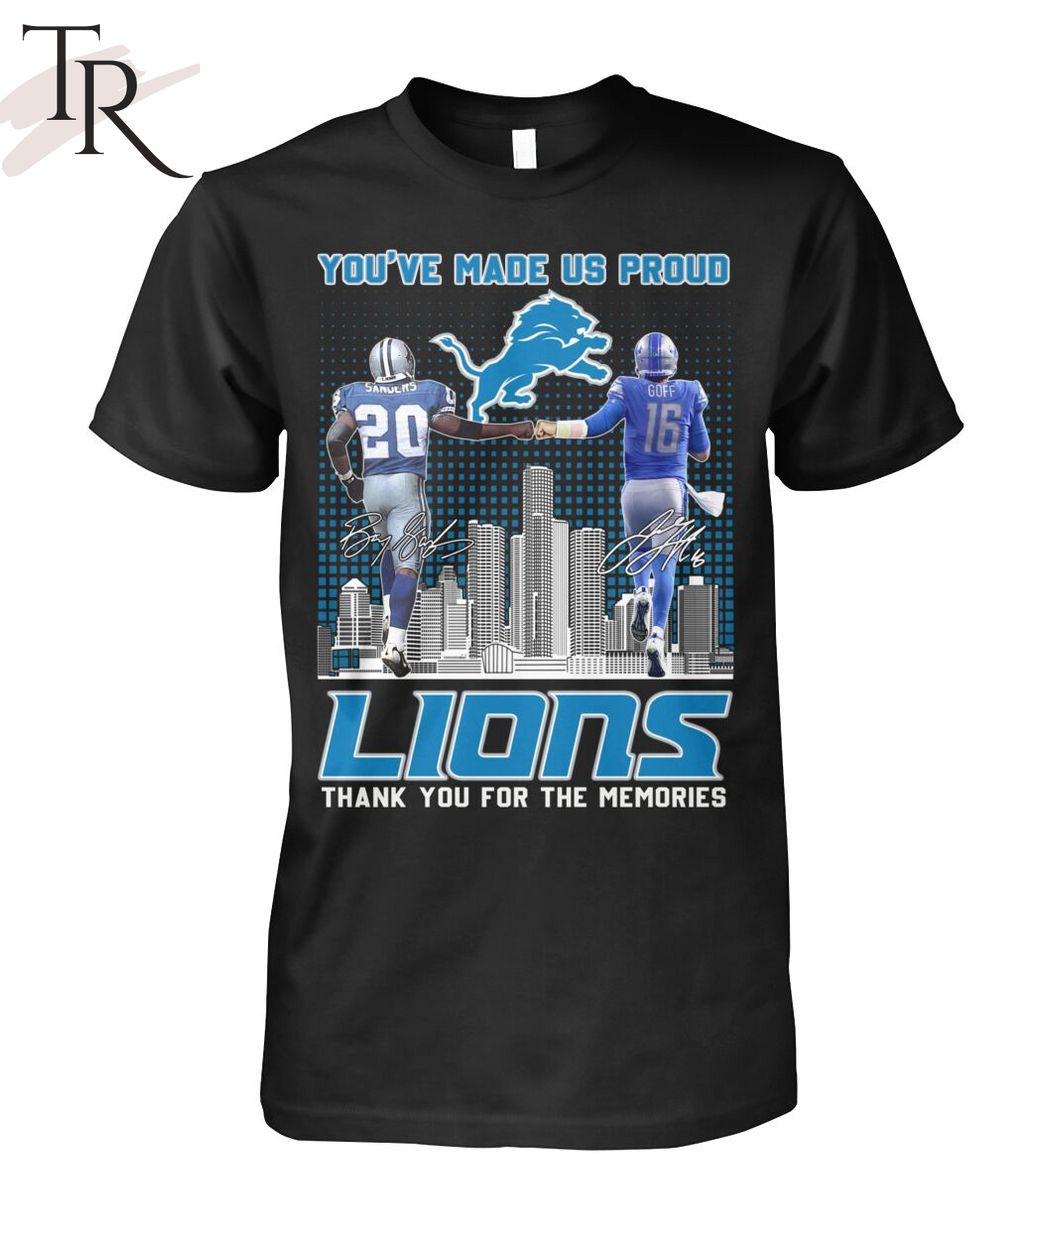 You've Made Us Proud Lions Thank You For The Memories T-Shirt